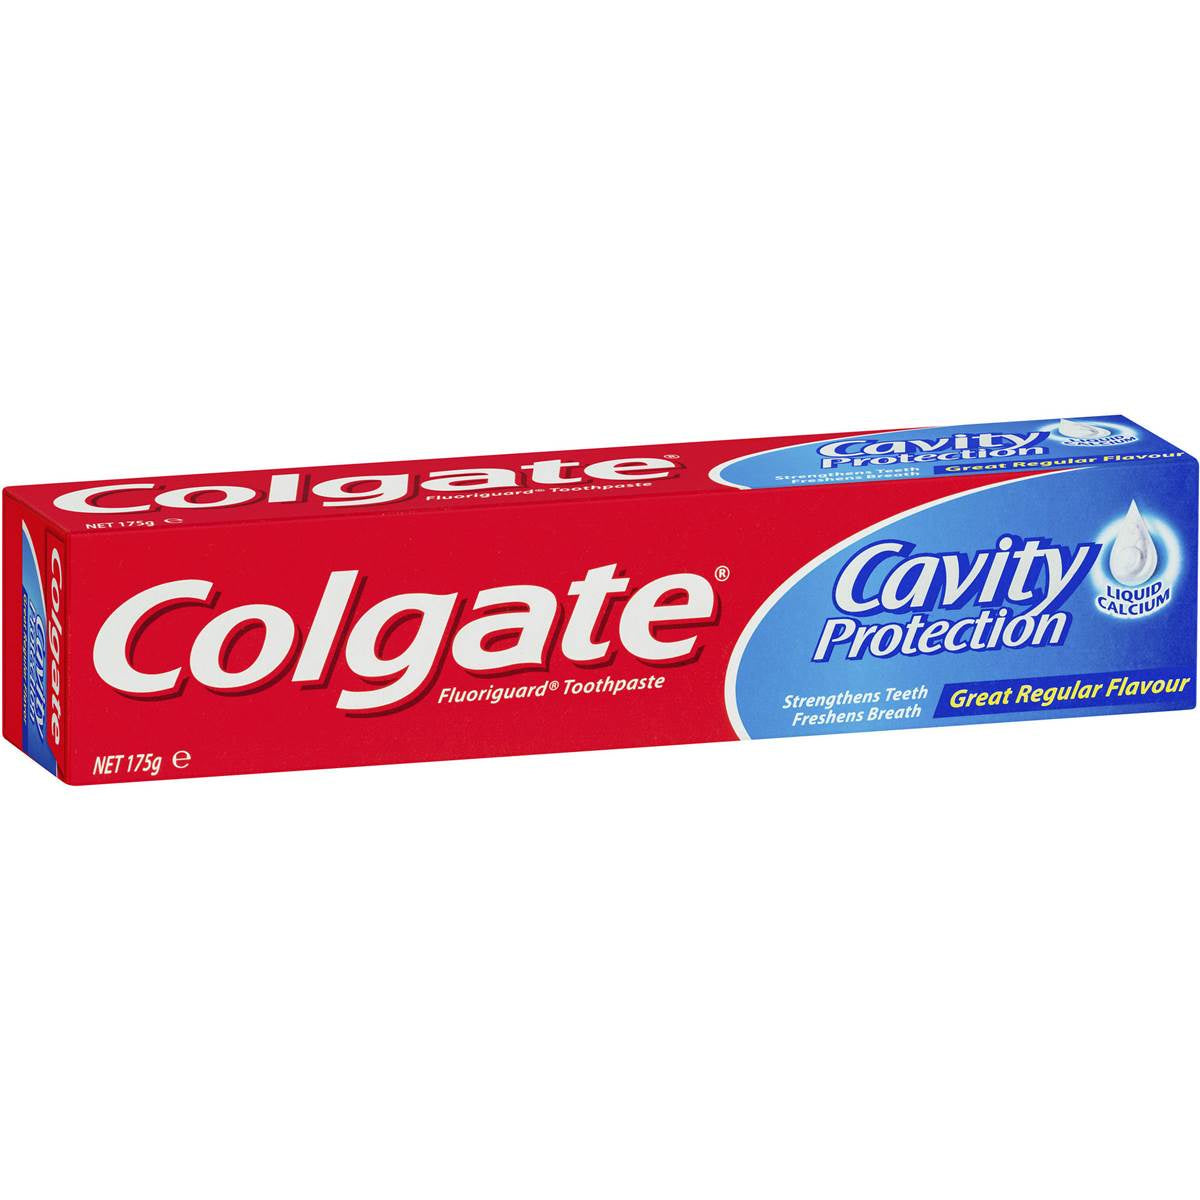 Colgate Cavity Protection Toothpaste 175g